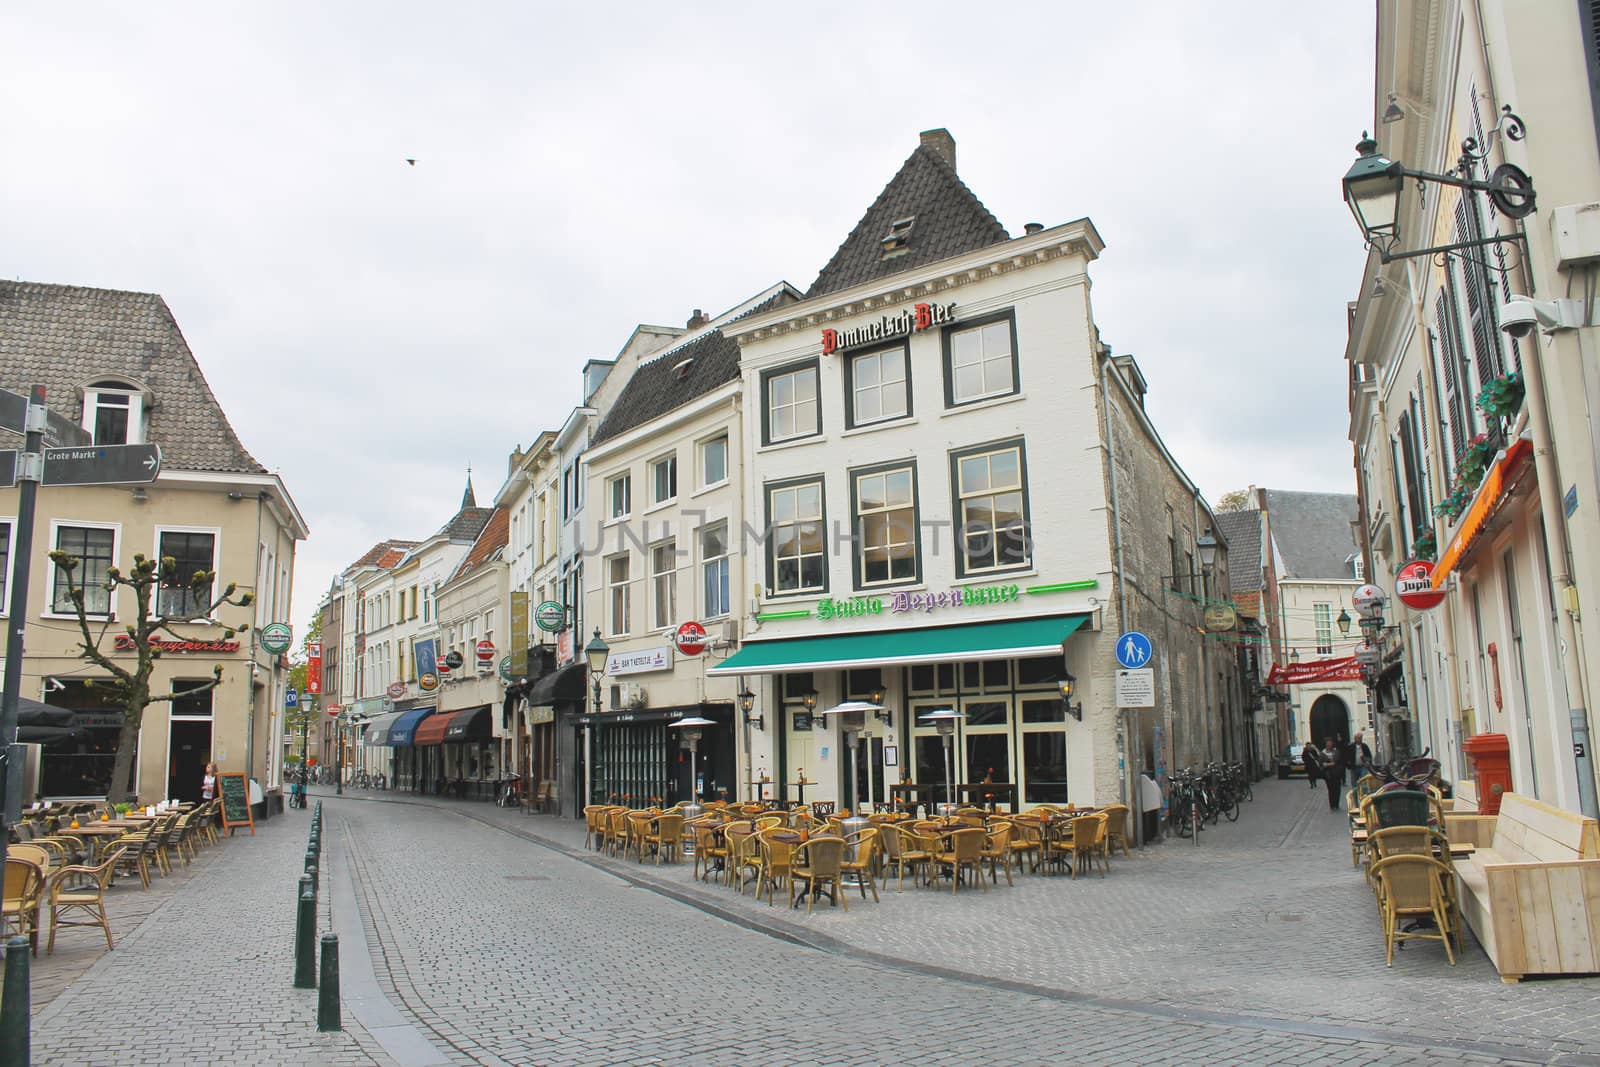 Street cafe in the Dutch city of Breda. Netherlands